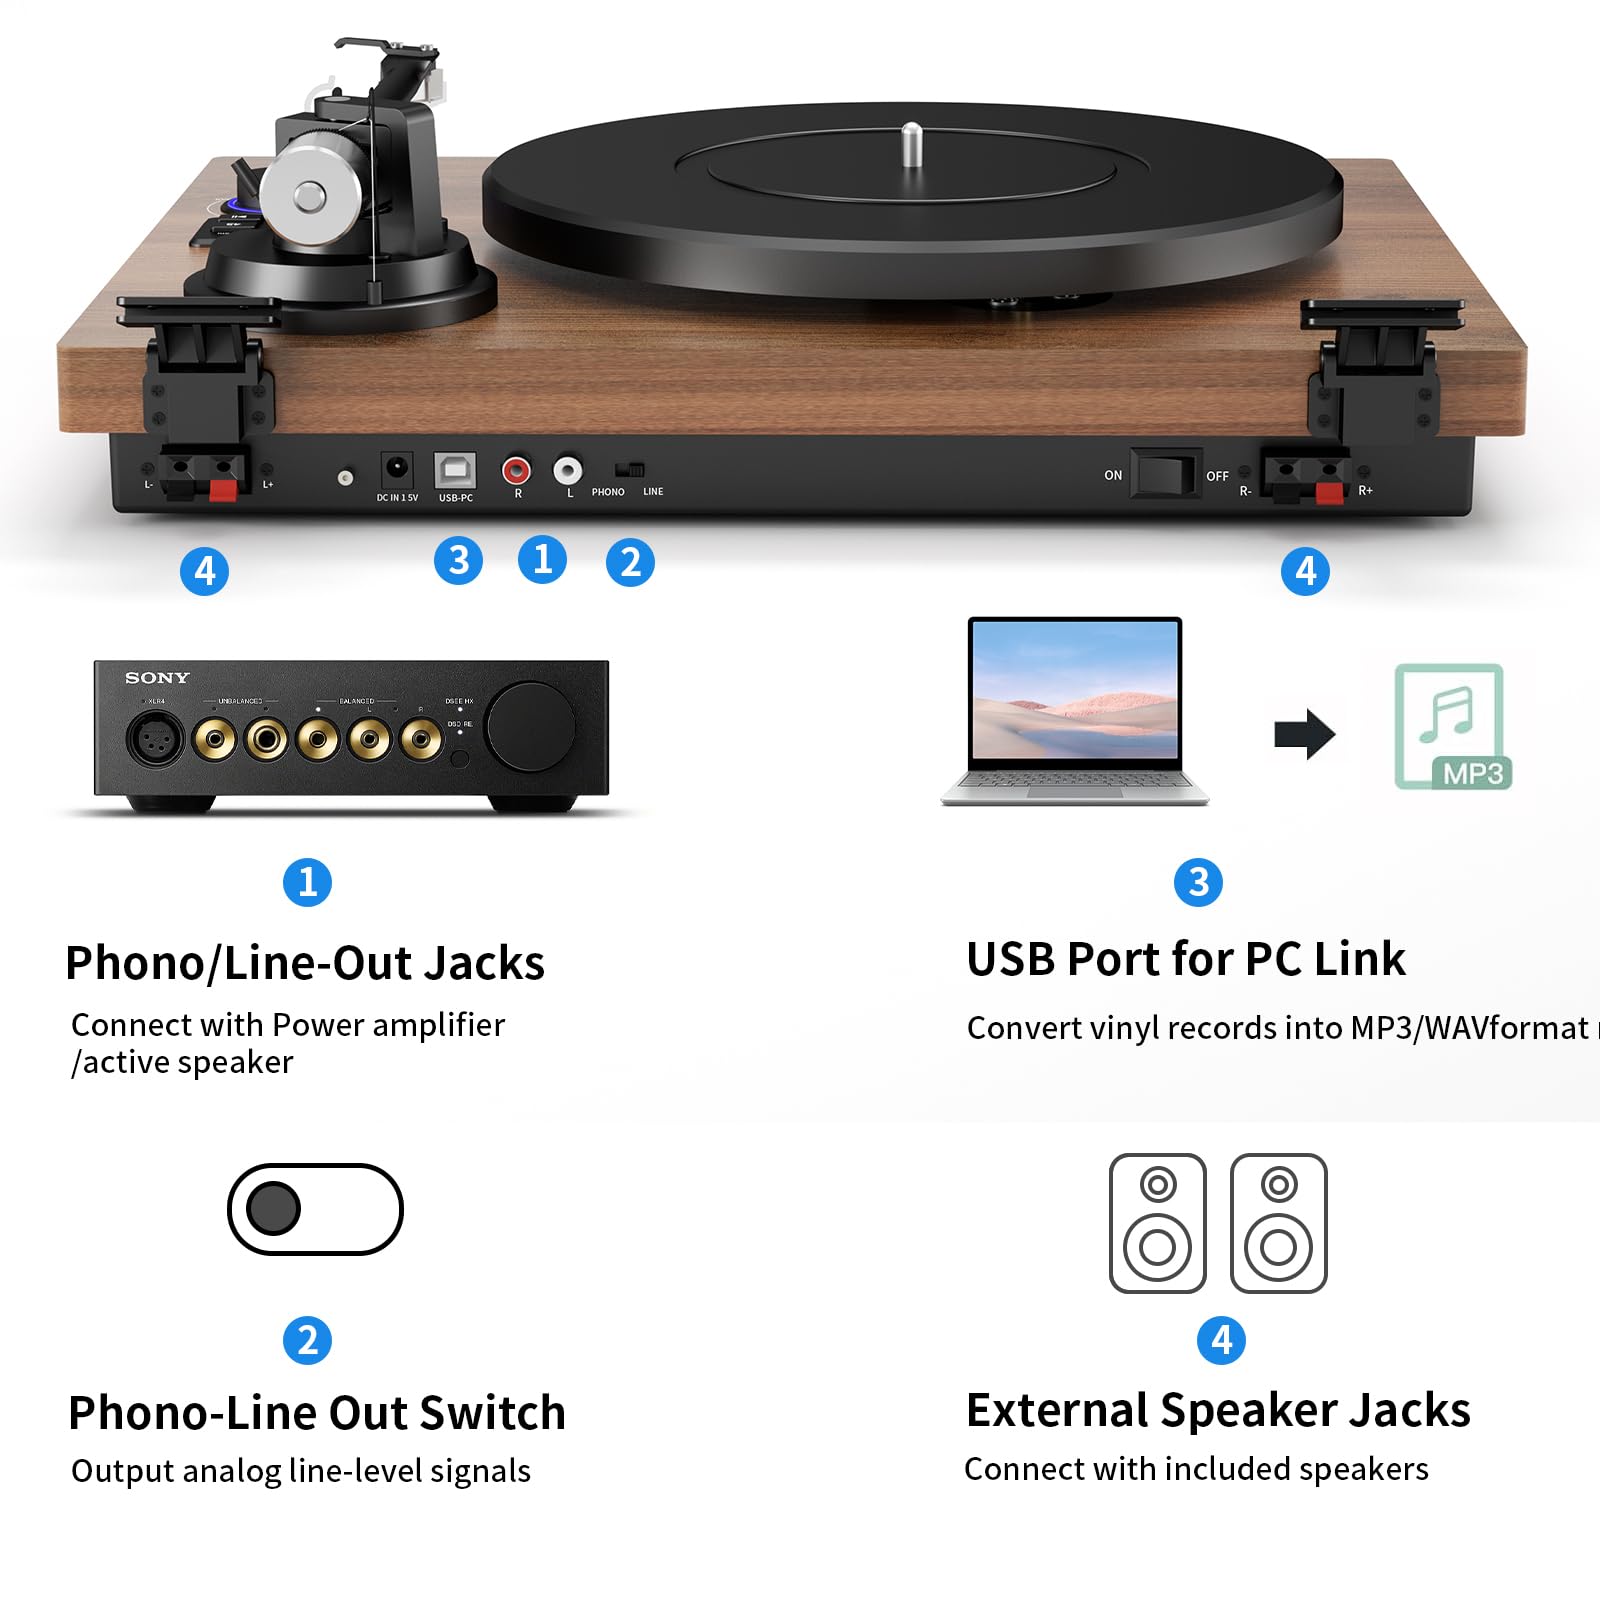 Record Player for Vinyl with Speakers,Bluetooth Turntable for Vinyl Records with 36W HiFi Stereo Speakers,Magnetic Cartridge & Adjustable Counter Weight and Anti-Skating,RCA Output